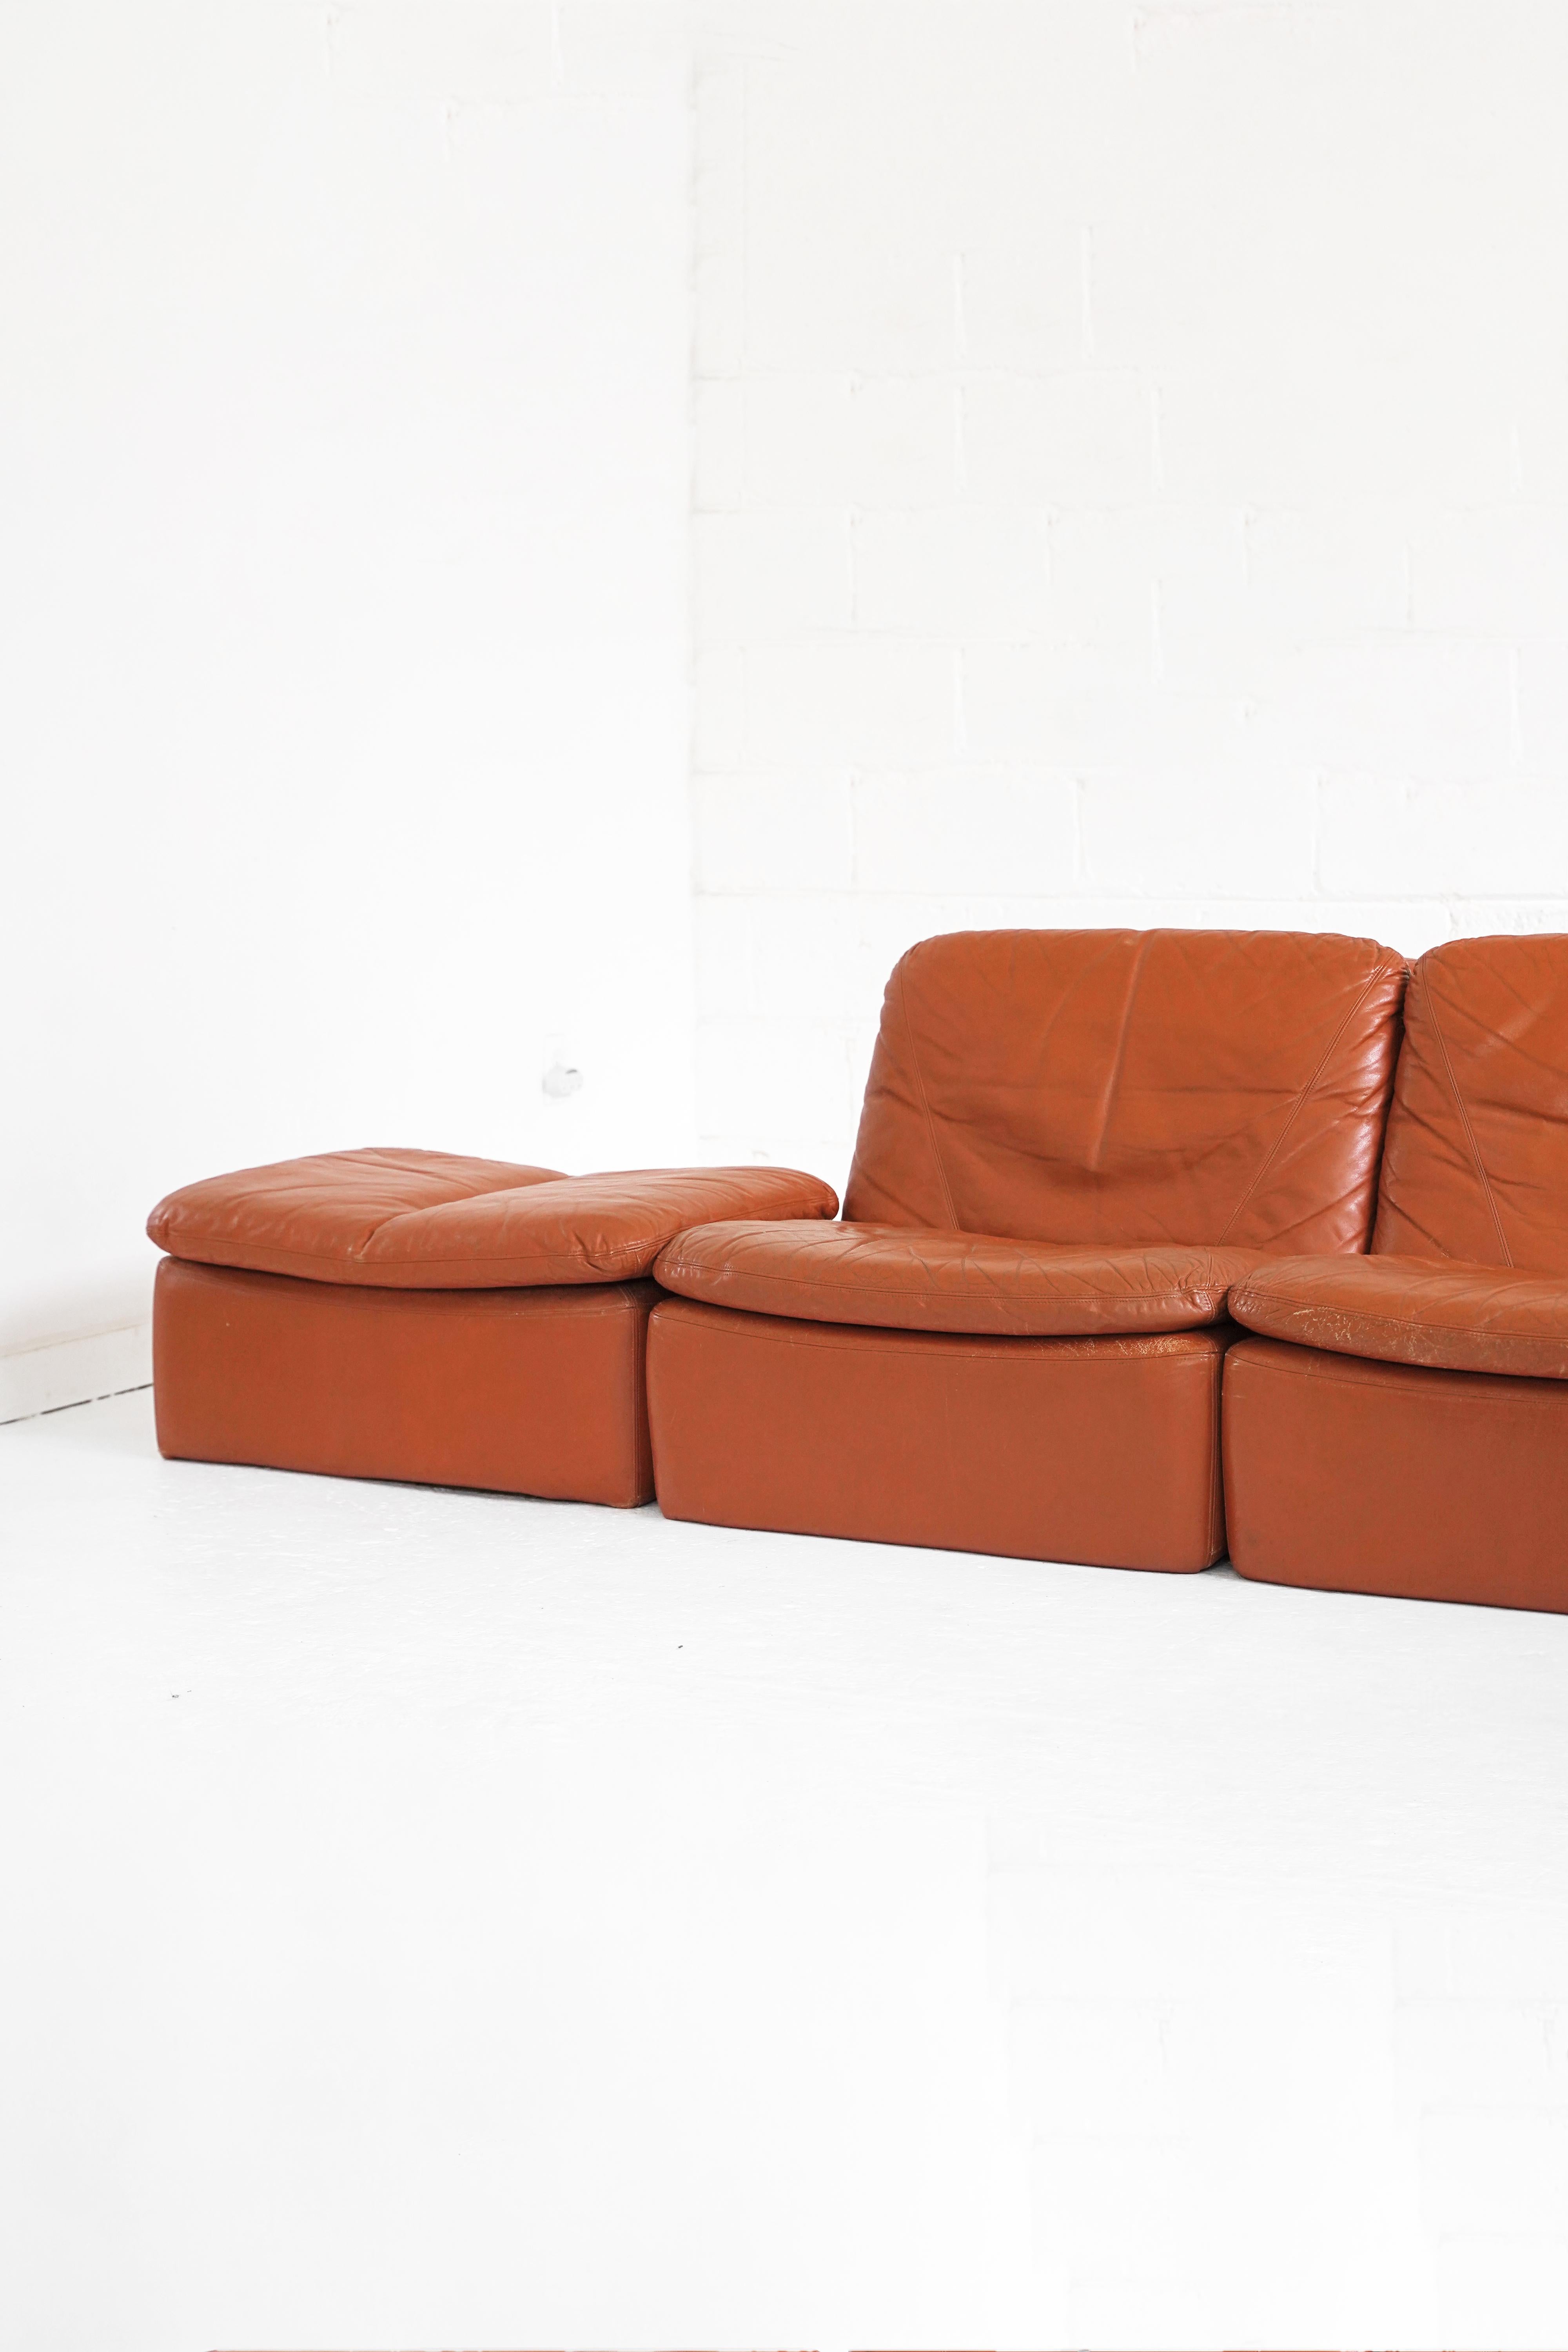 Vintage Modular Leather Sectional Sofa and Coffee Table C300 by Interna Design 5